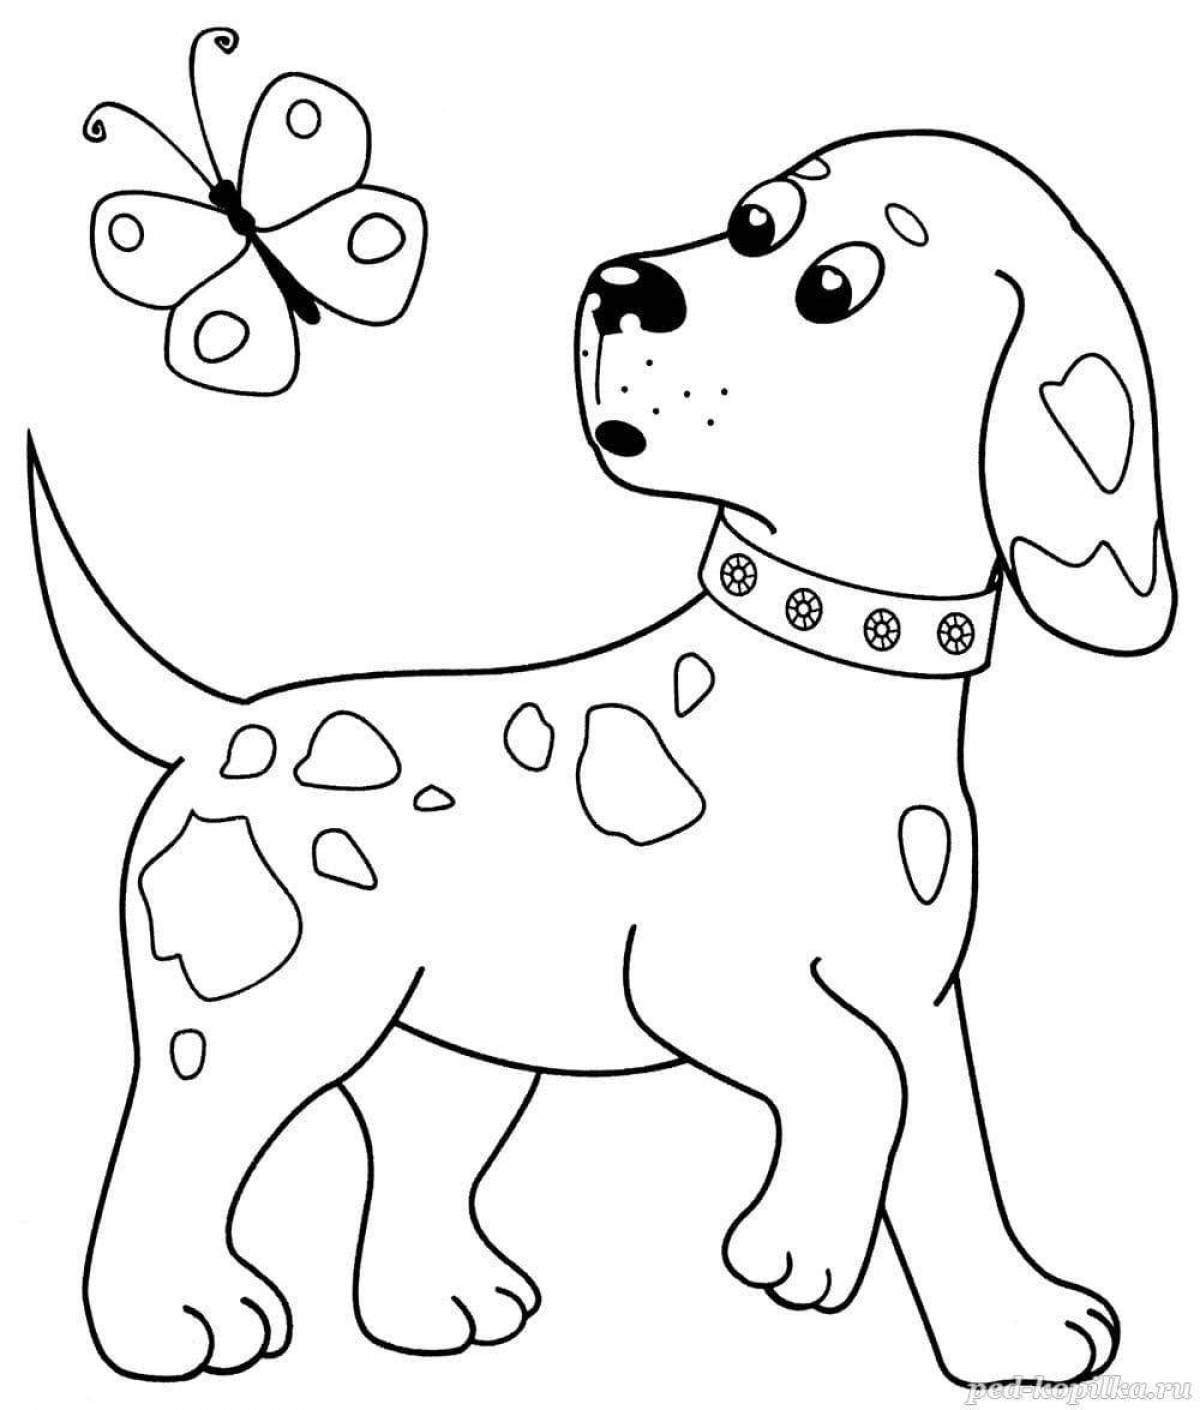 Live coloring dog for children 3-4 years old